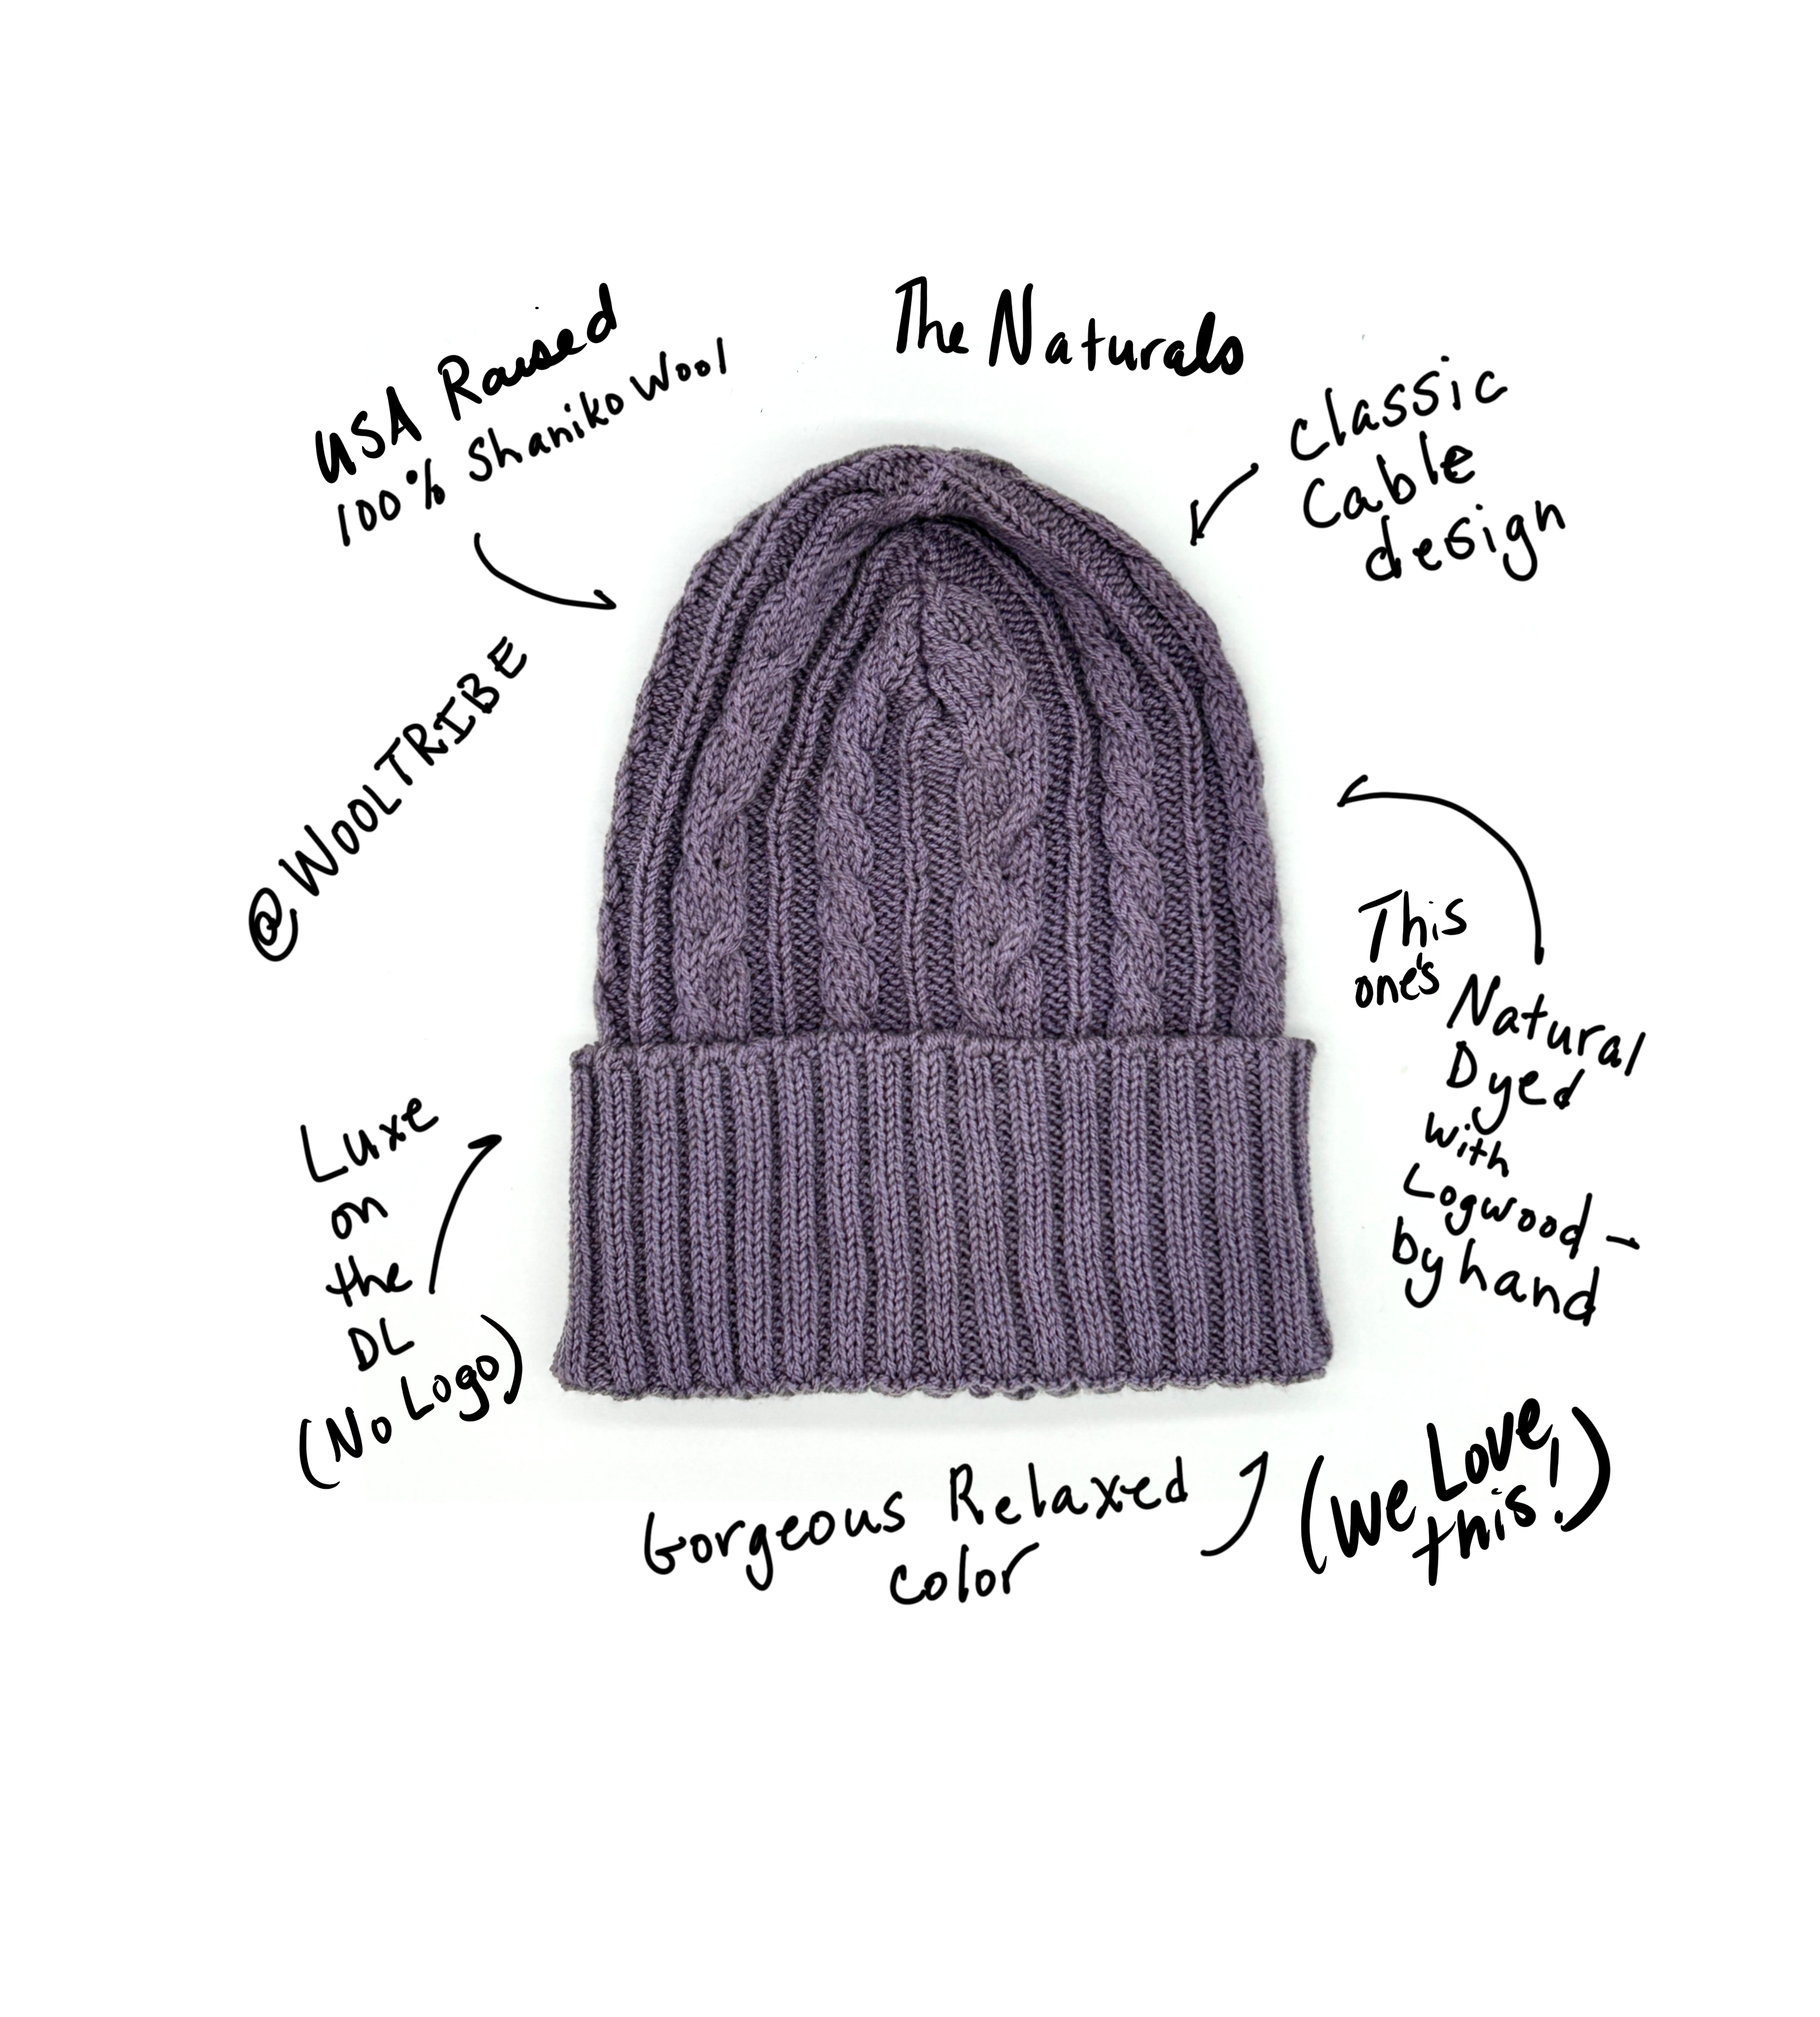 A naturally dyed purple WoolTribe beanie made of 100% USA Shaniko wool,  with hand written notes around it. 